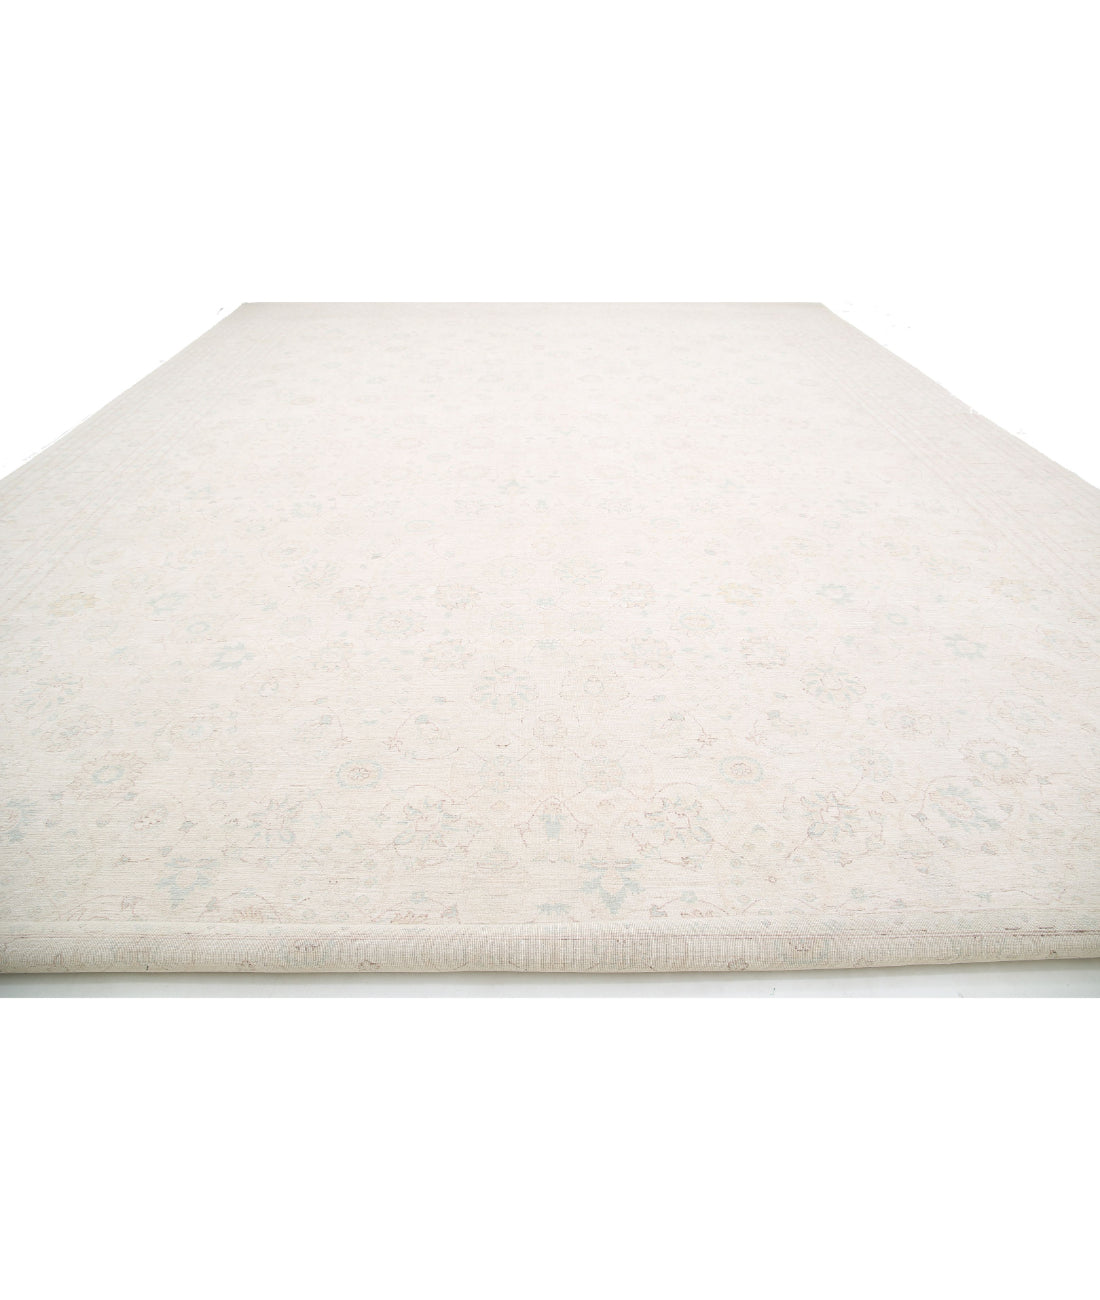 Serenity 17'0'' X 23'0'' Hand-Knotted Wool Rug 17'0'' x 23'0'' (510 X 690) / Blue / Ivory